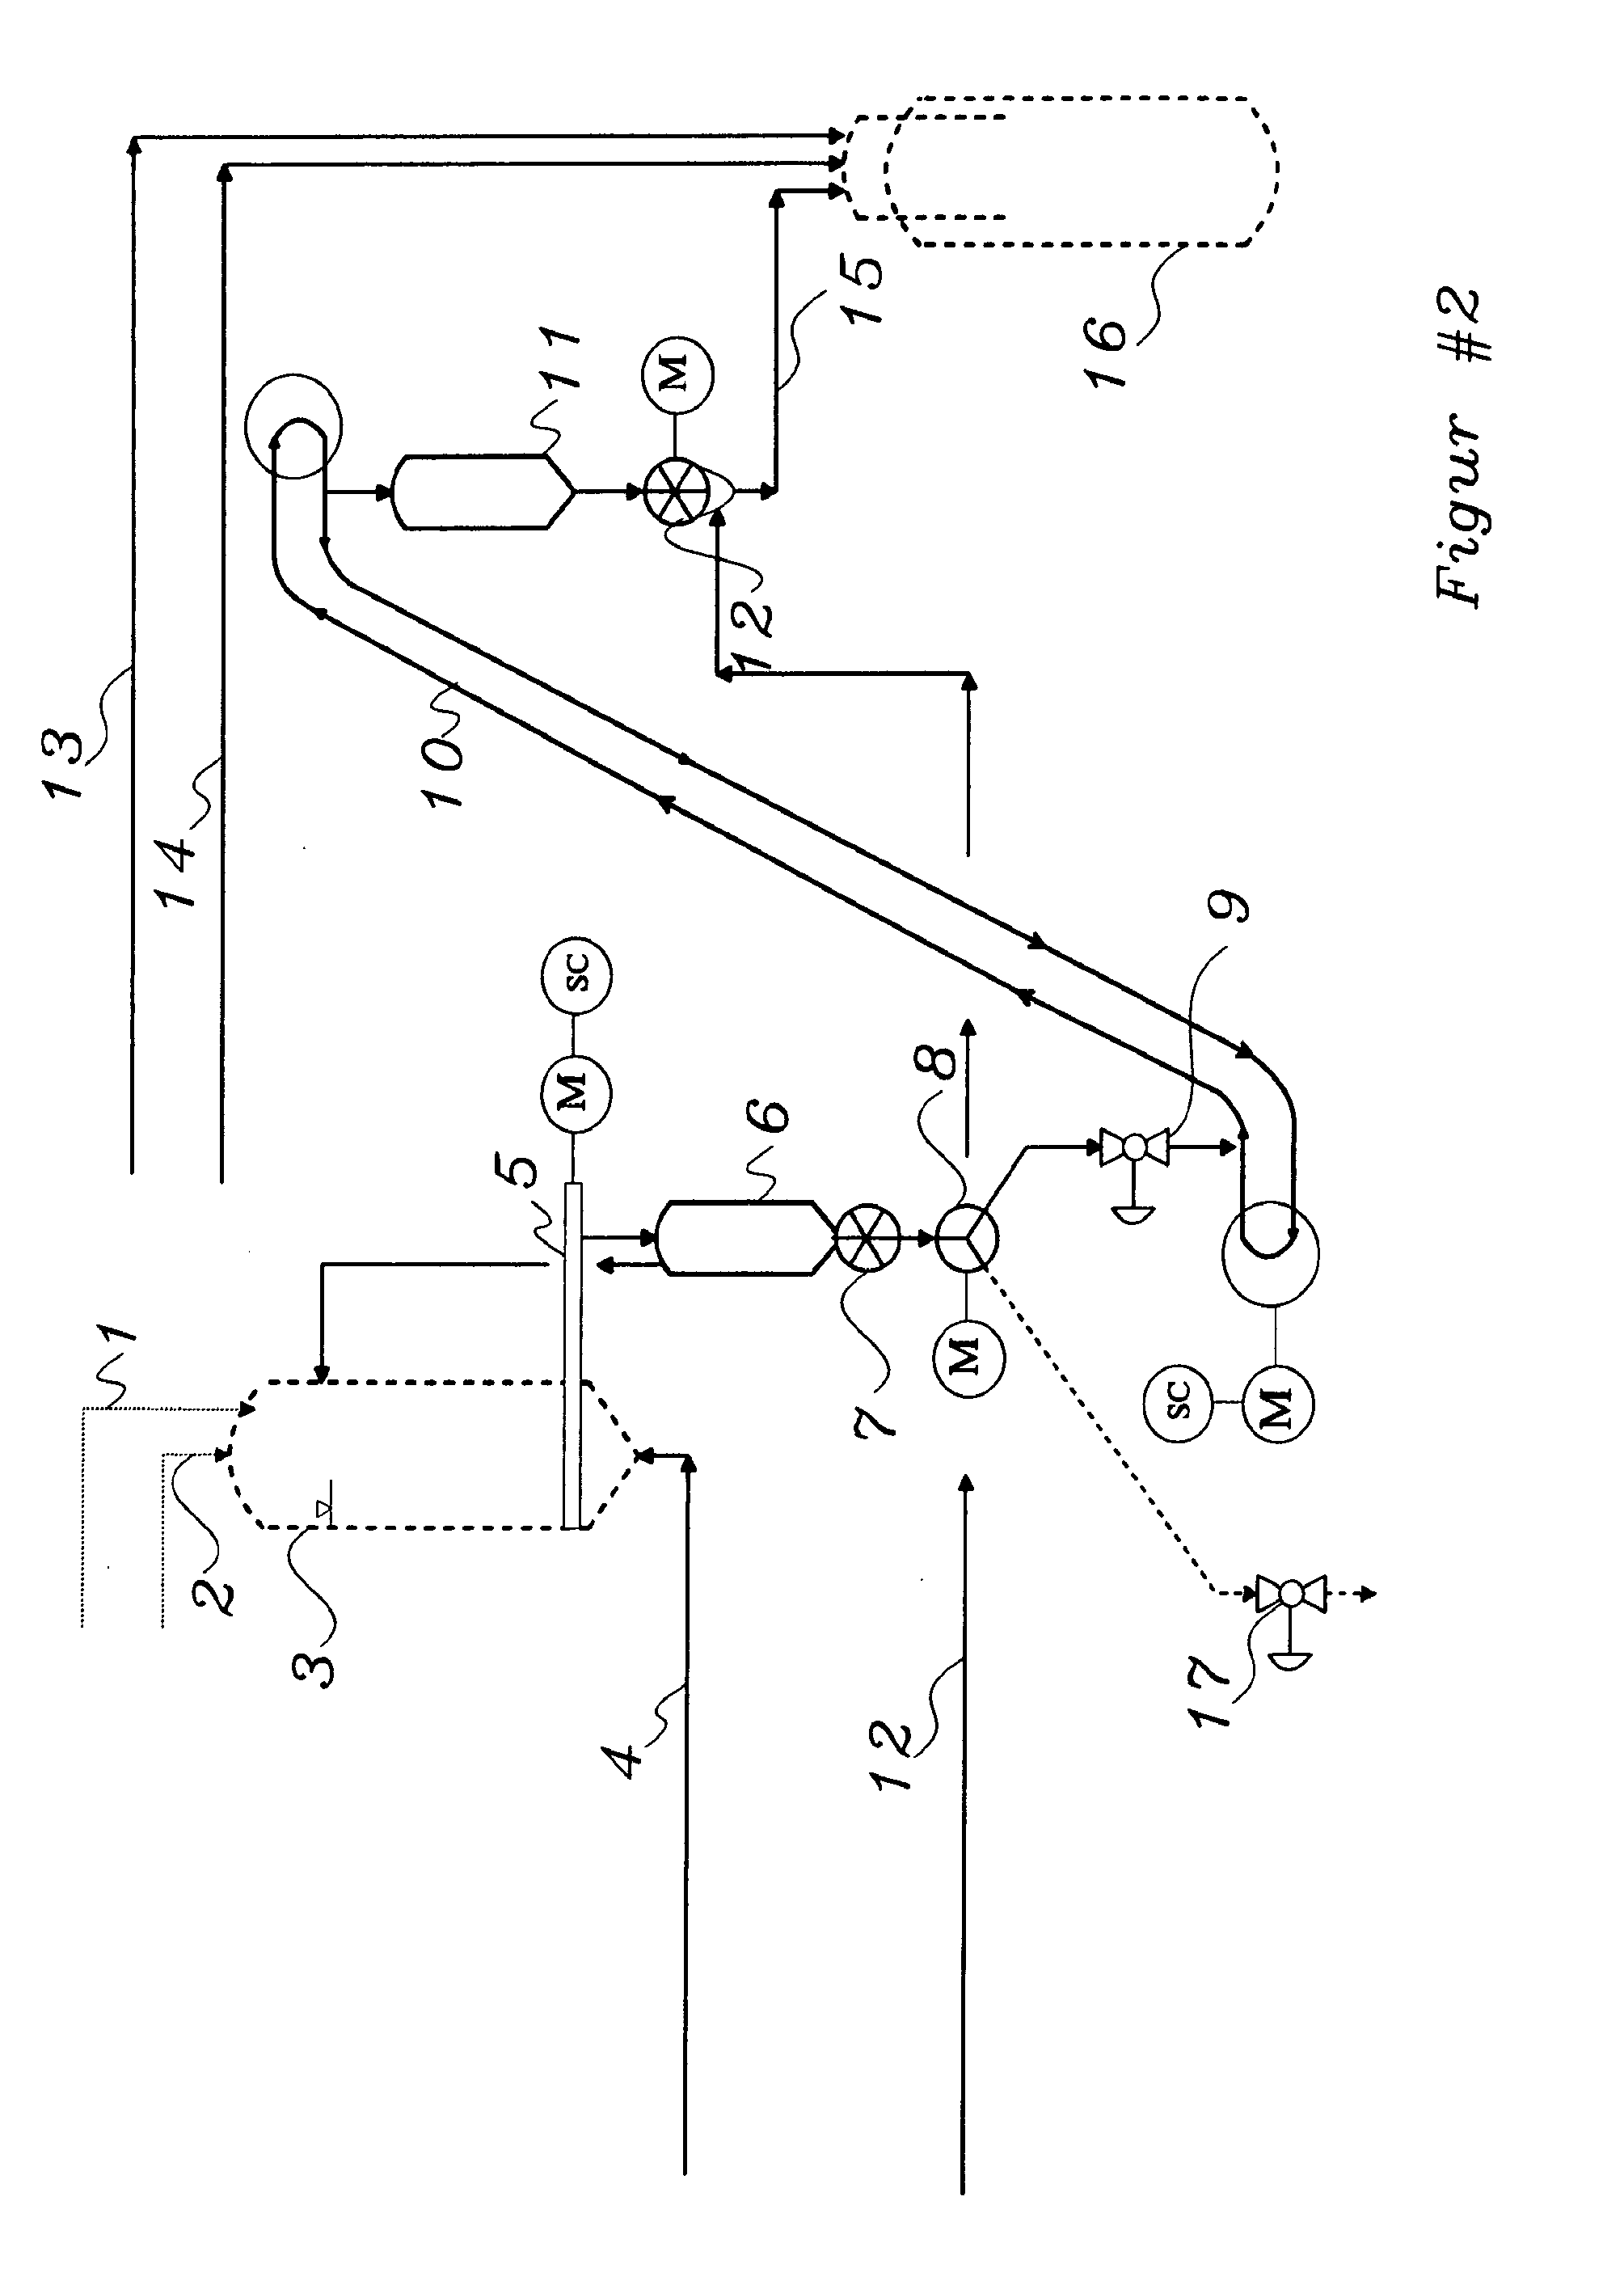 Process for continuous dry conveying of carbonaceous materials subject to partial oxidization to a pressurized gasification reactor